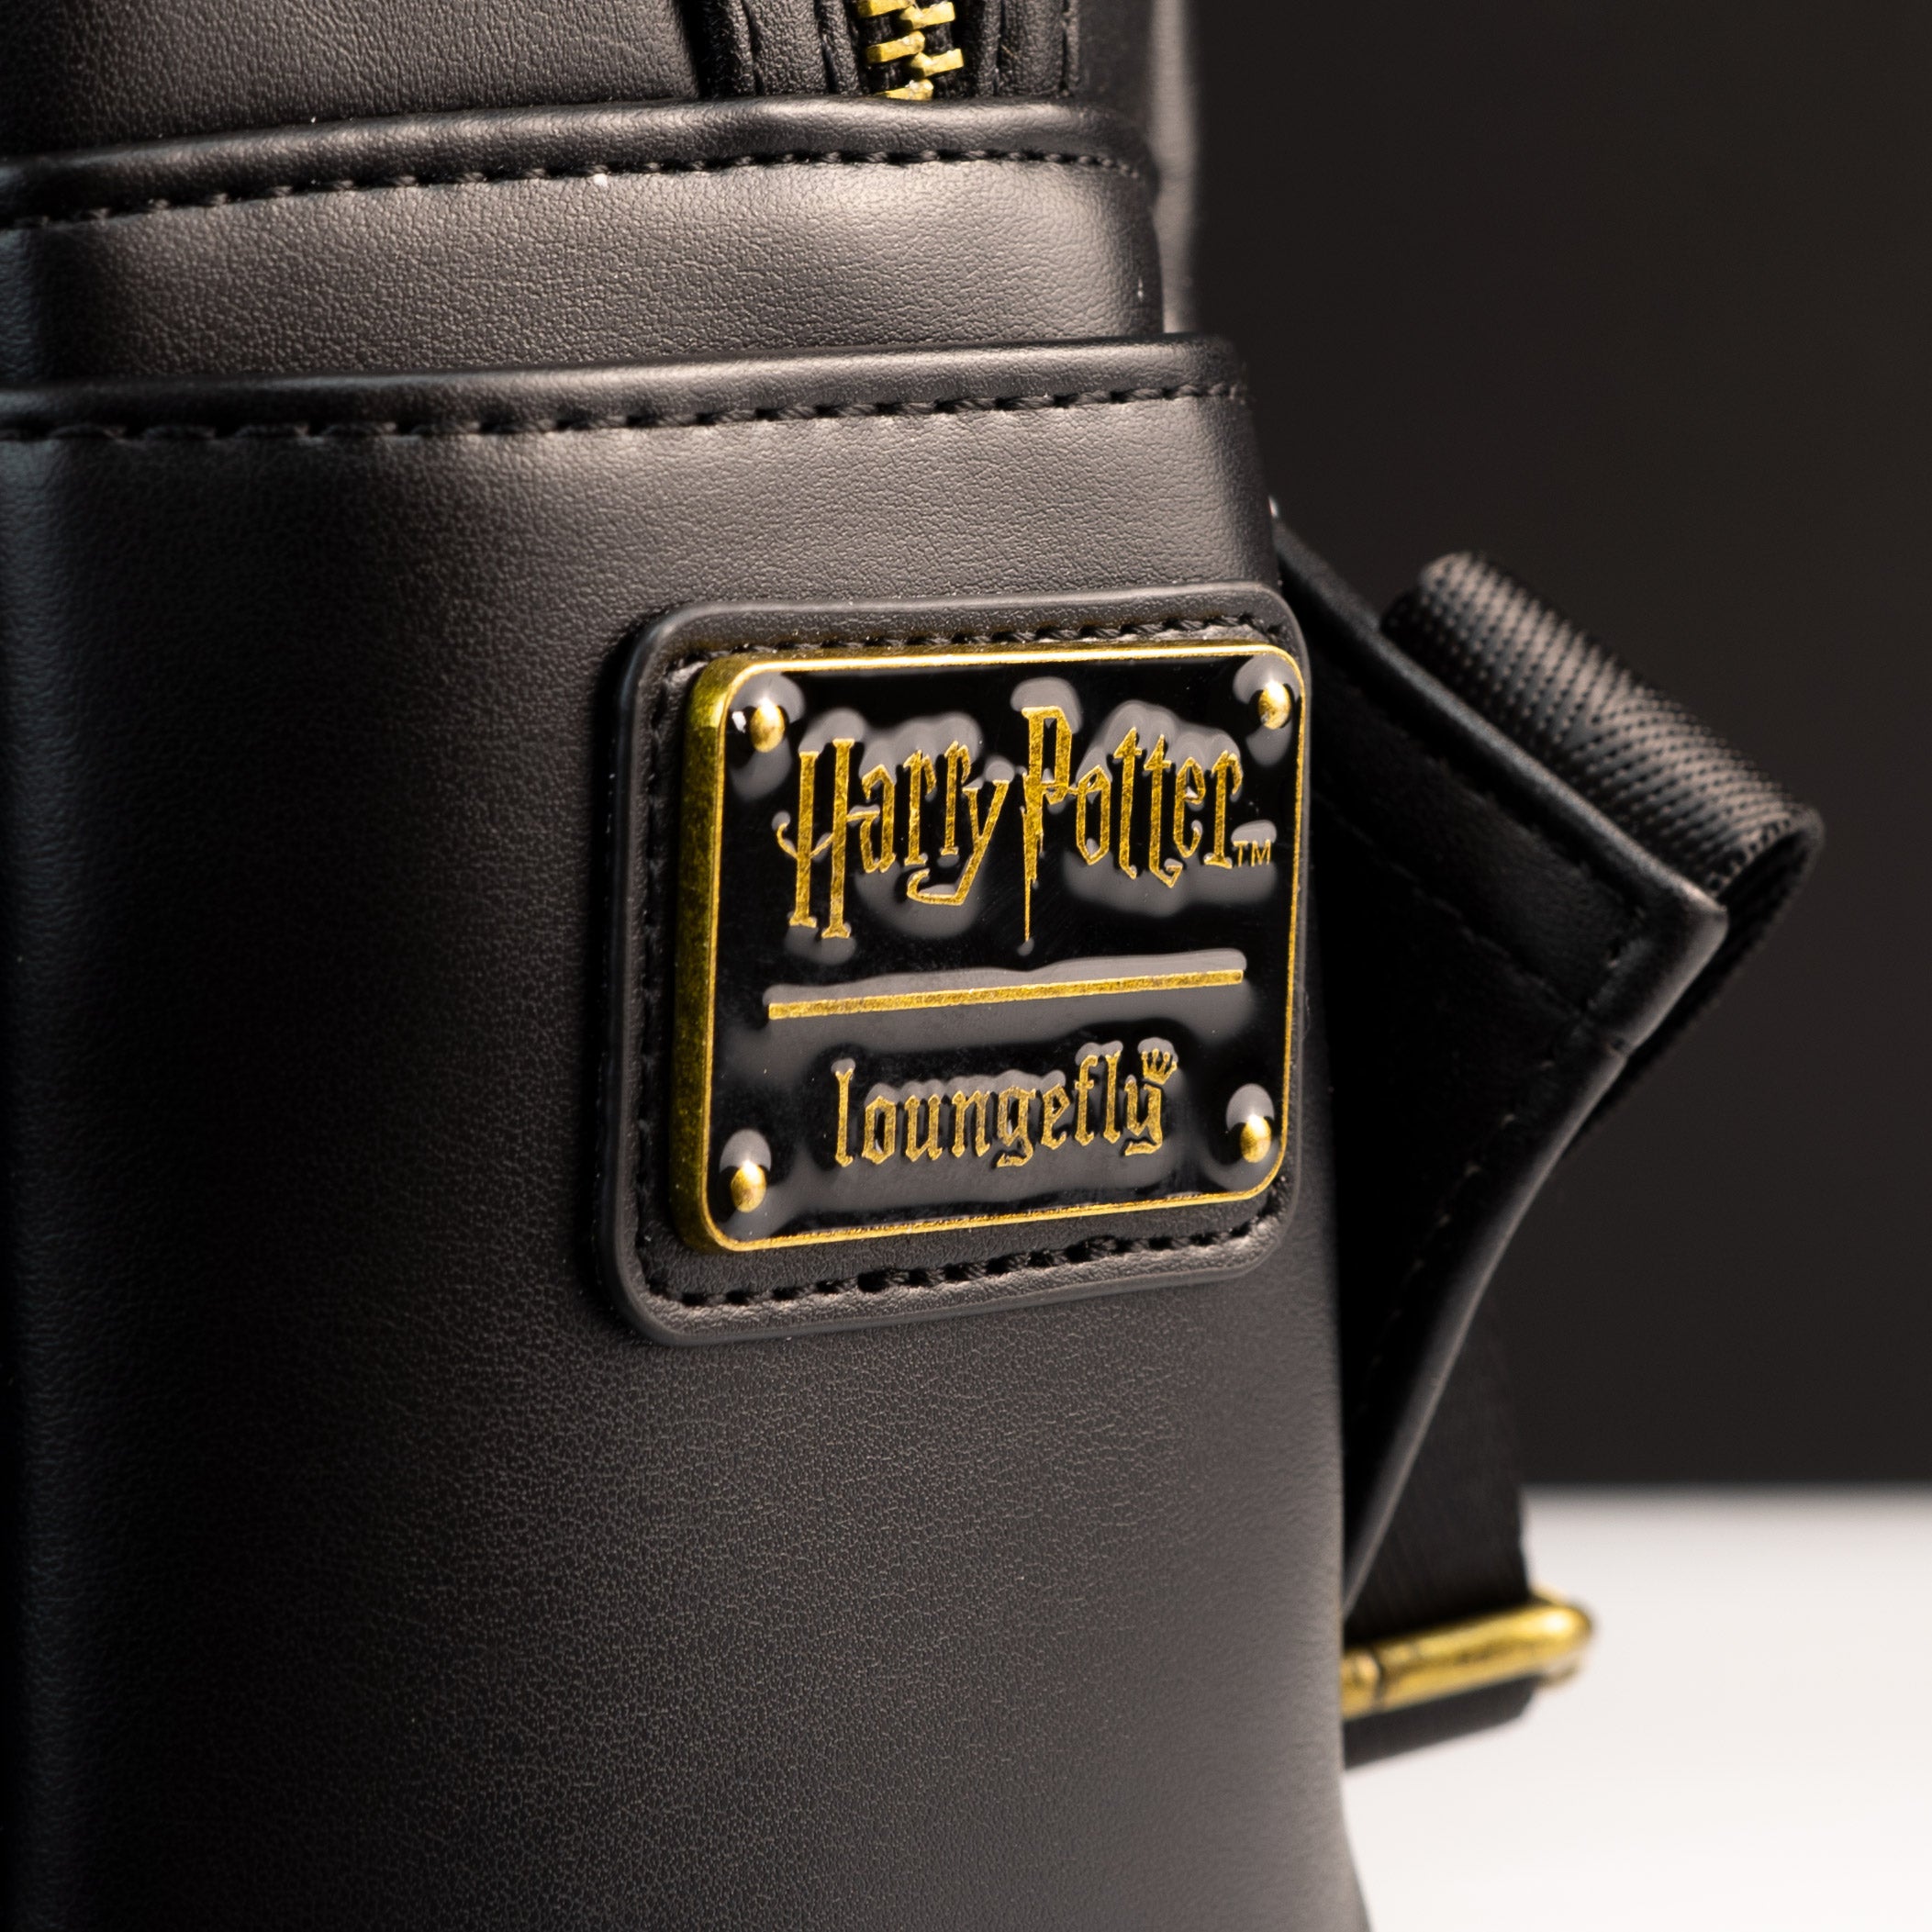 Loungefly x Harry Potter Voldemort Among Death Eaters Mini Backpack